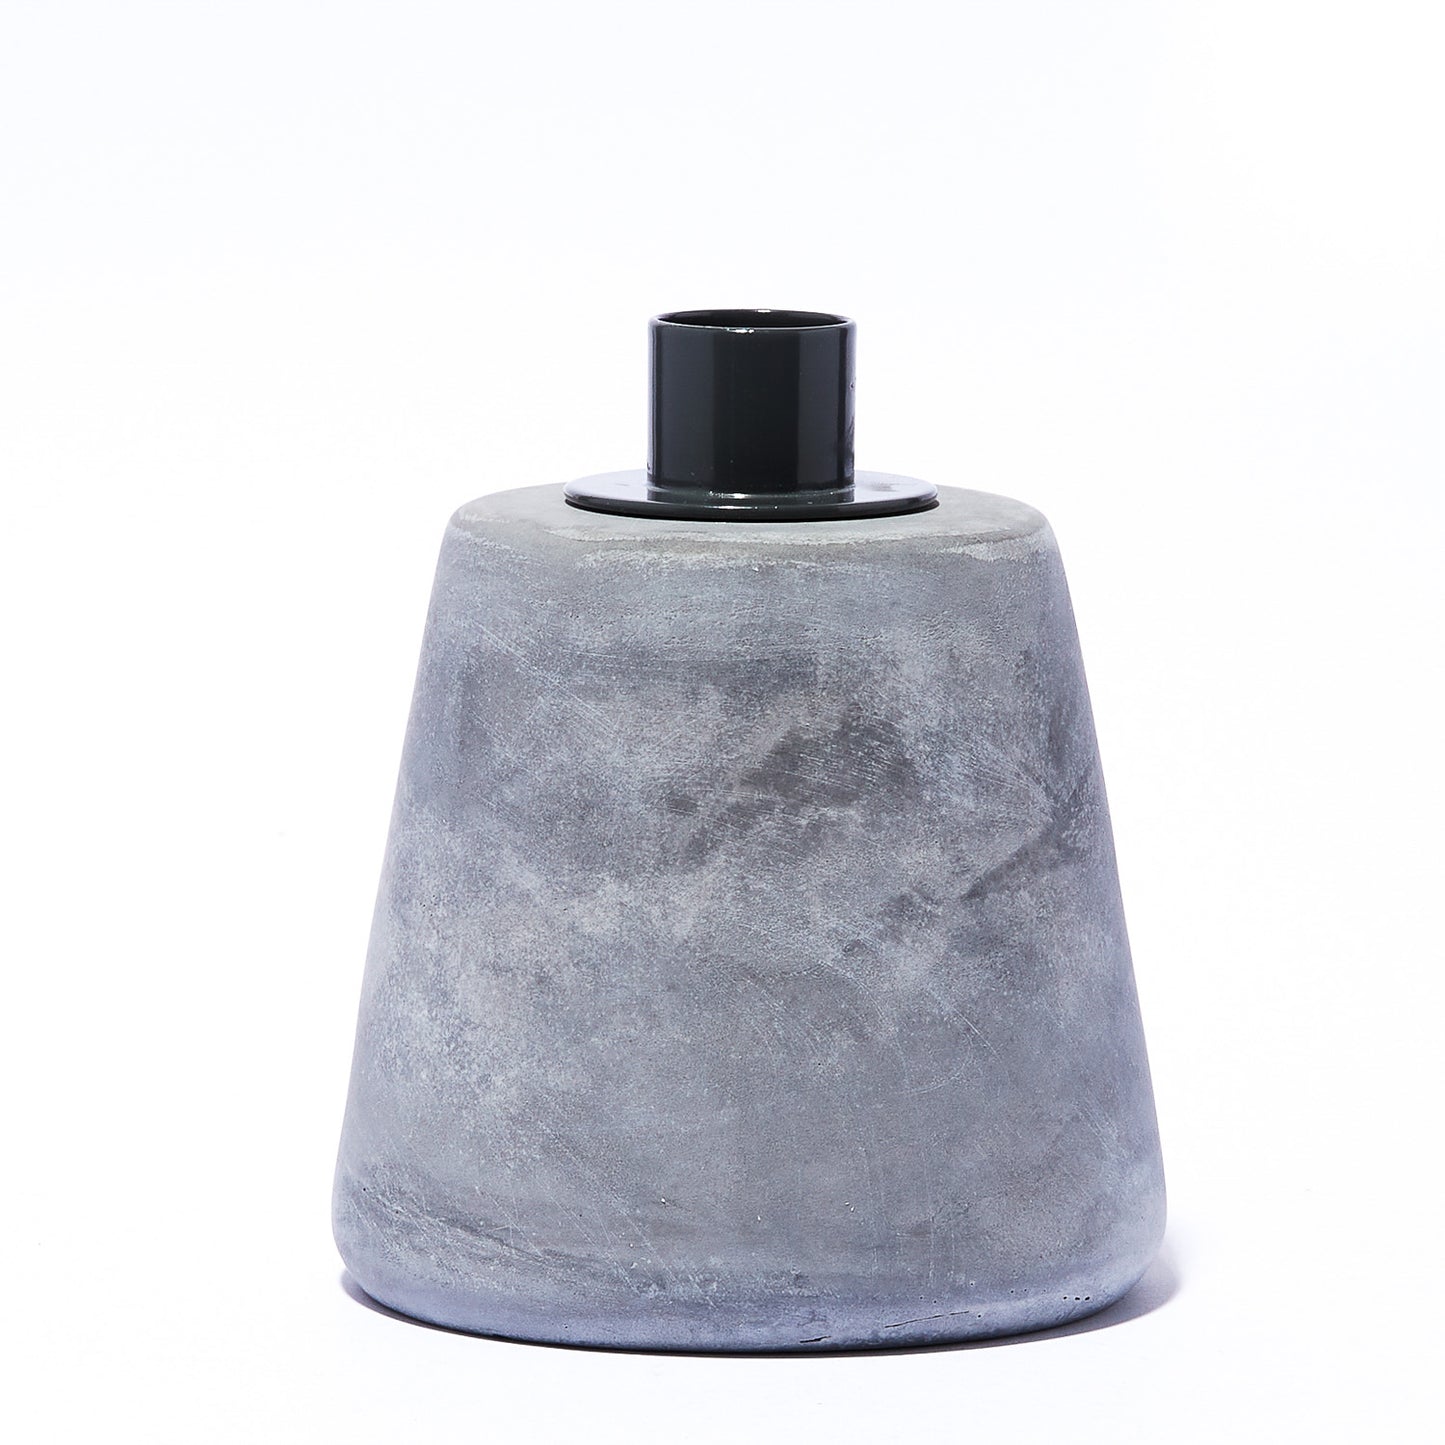 CONE CANDLEHOLDER TALL | GREY